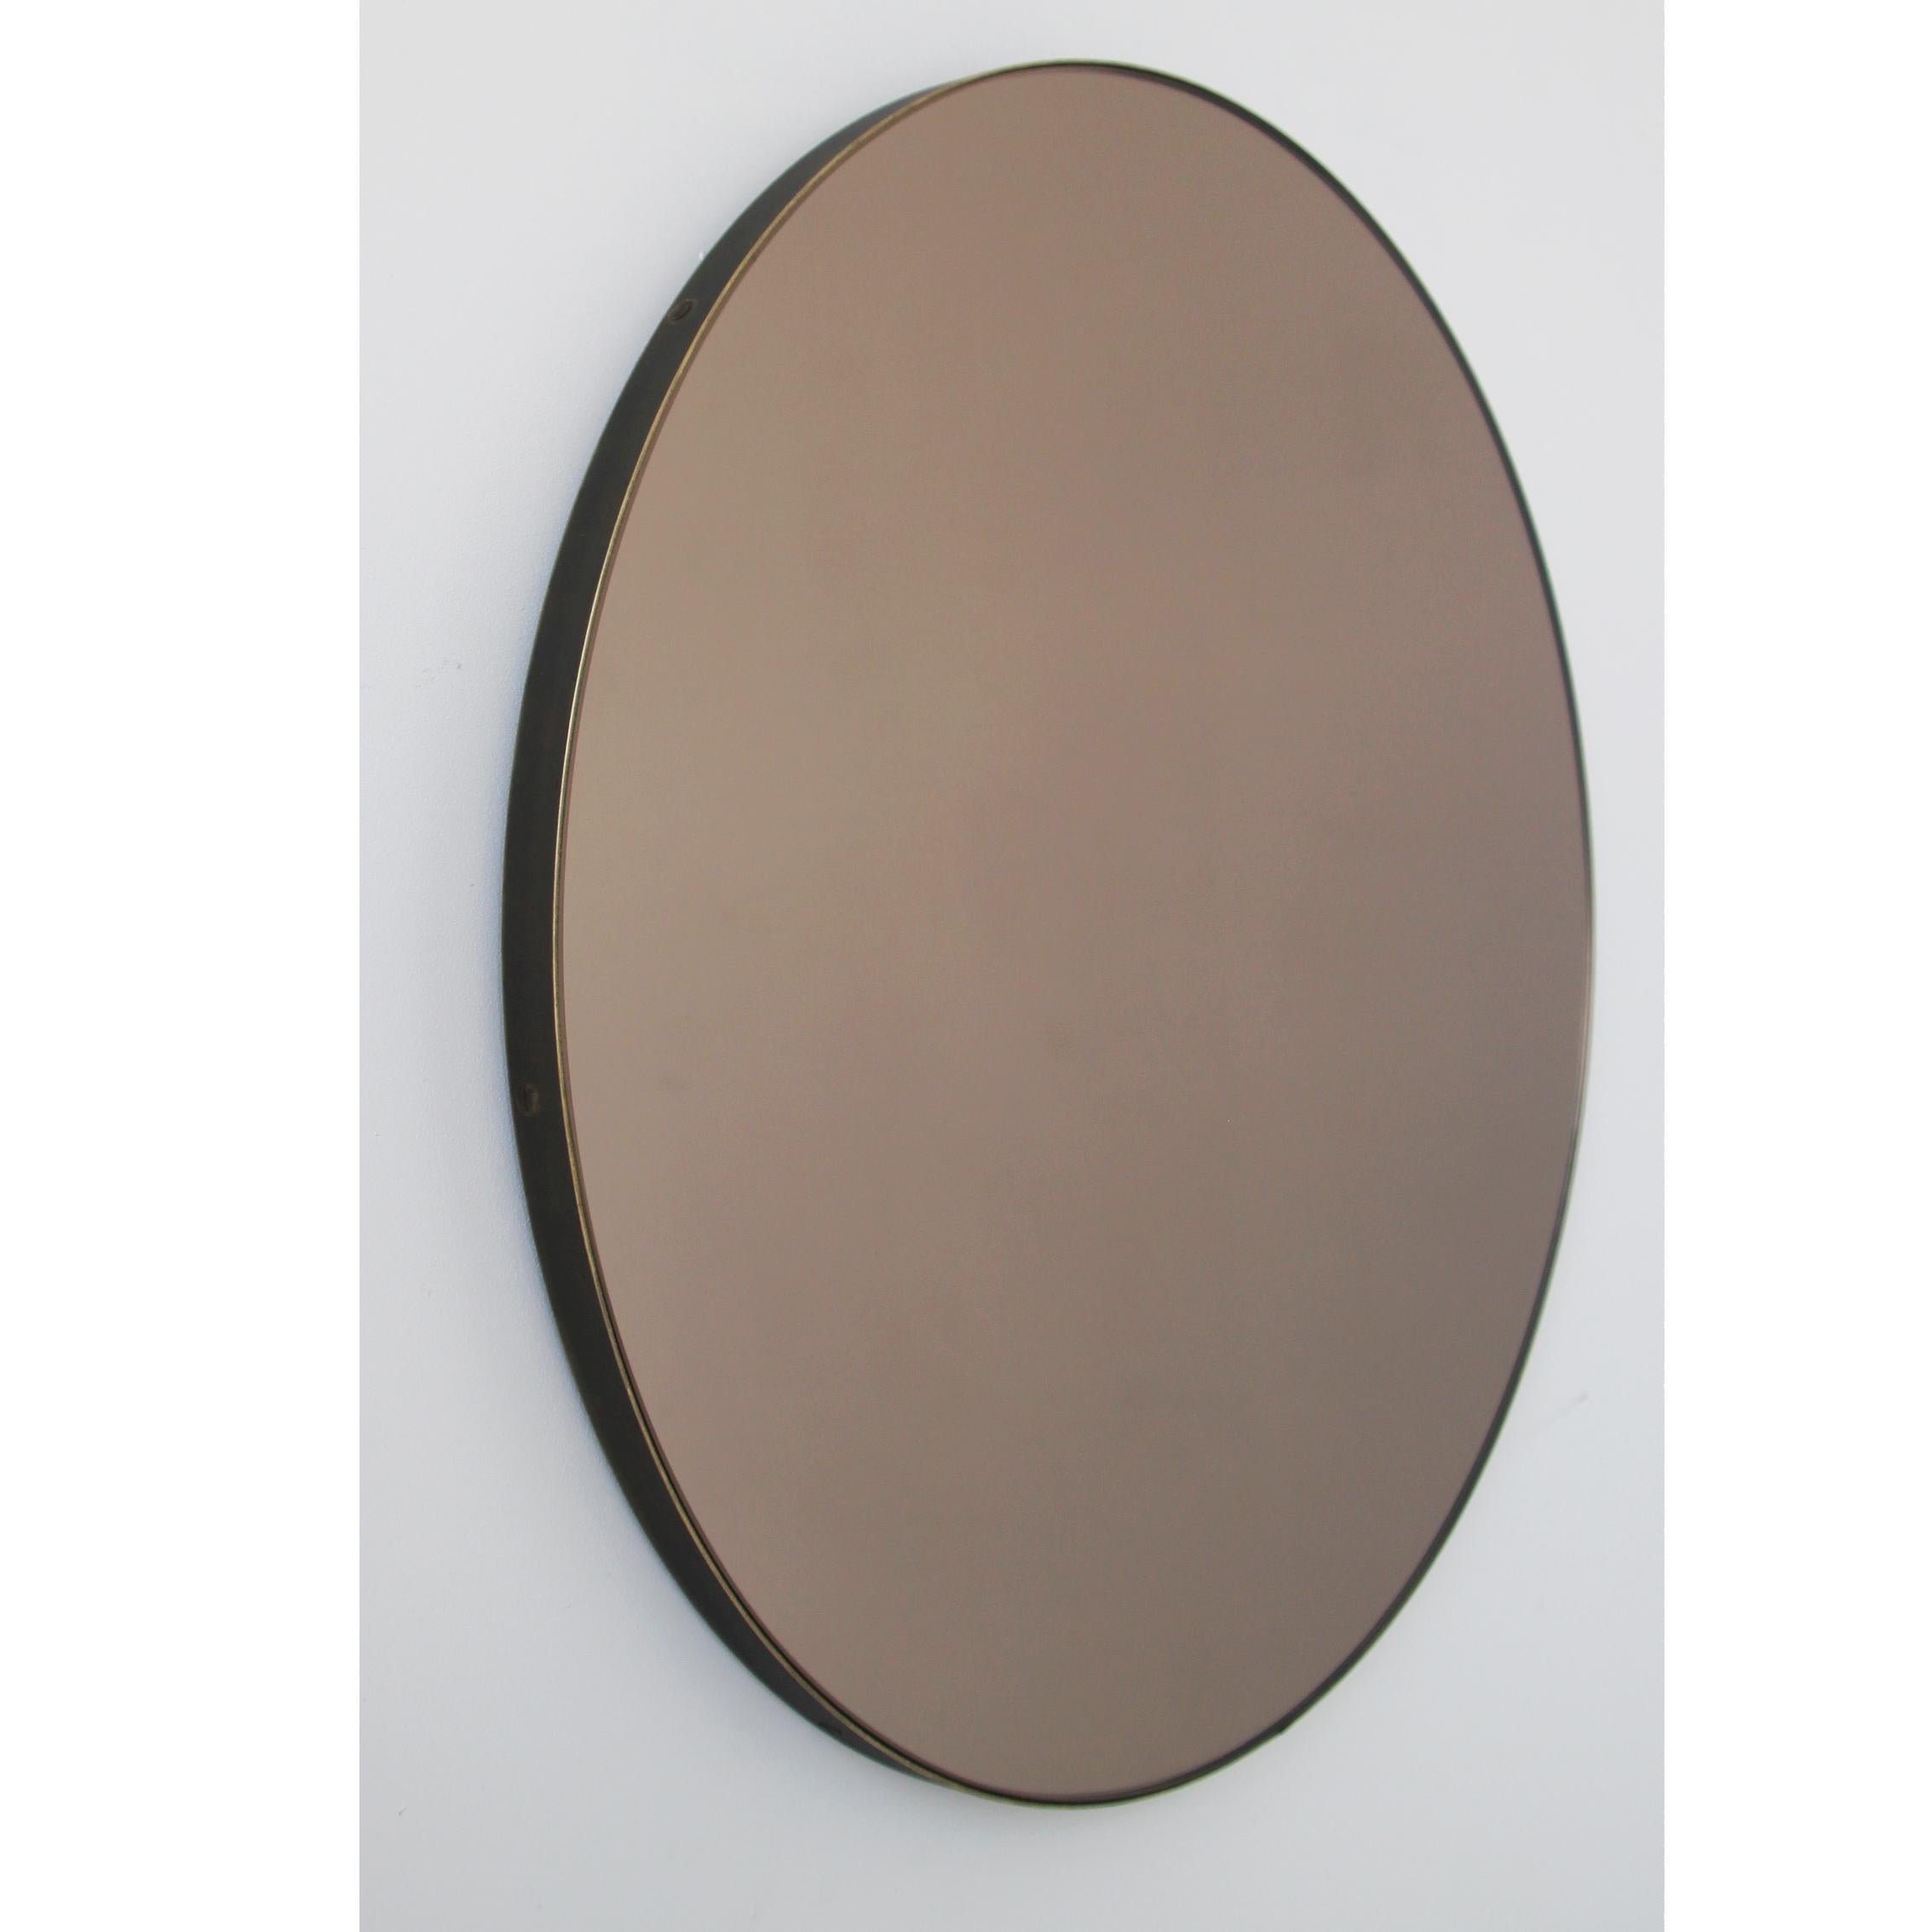 Contemporary bronze tinted Orbis™ round mirror with a solid brass frame with a bronze patina finish. Designed and handcrafted in London, UK.

Our mirrors are designed with an integrated French cleat (split batten) system that ensures the mirror is